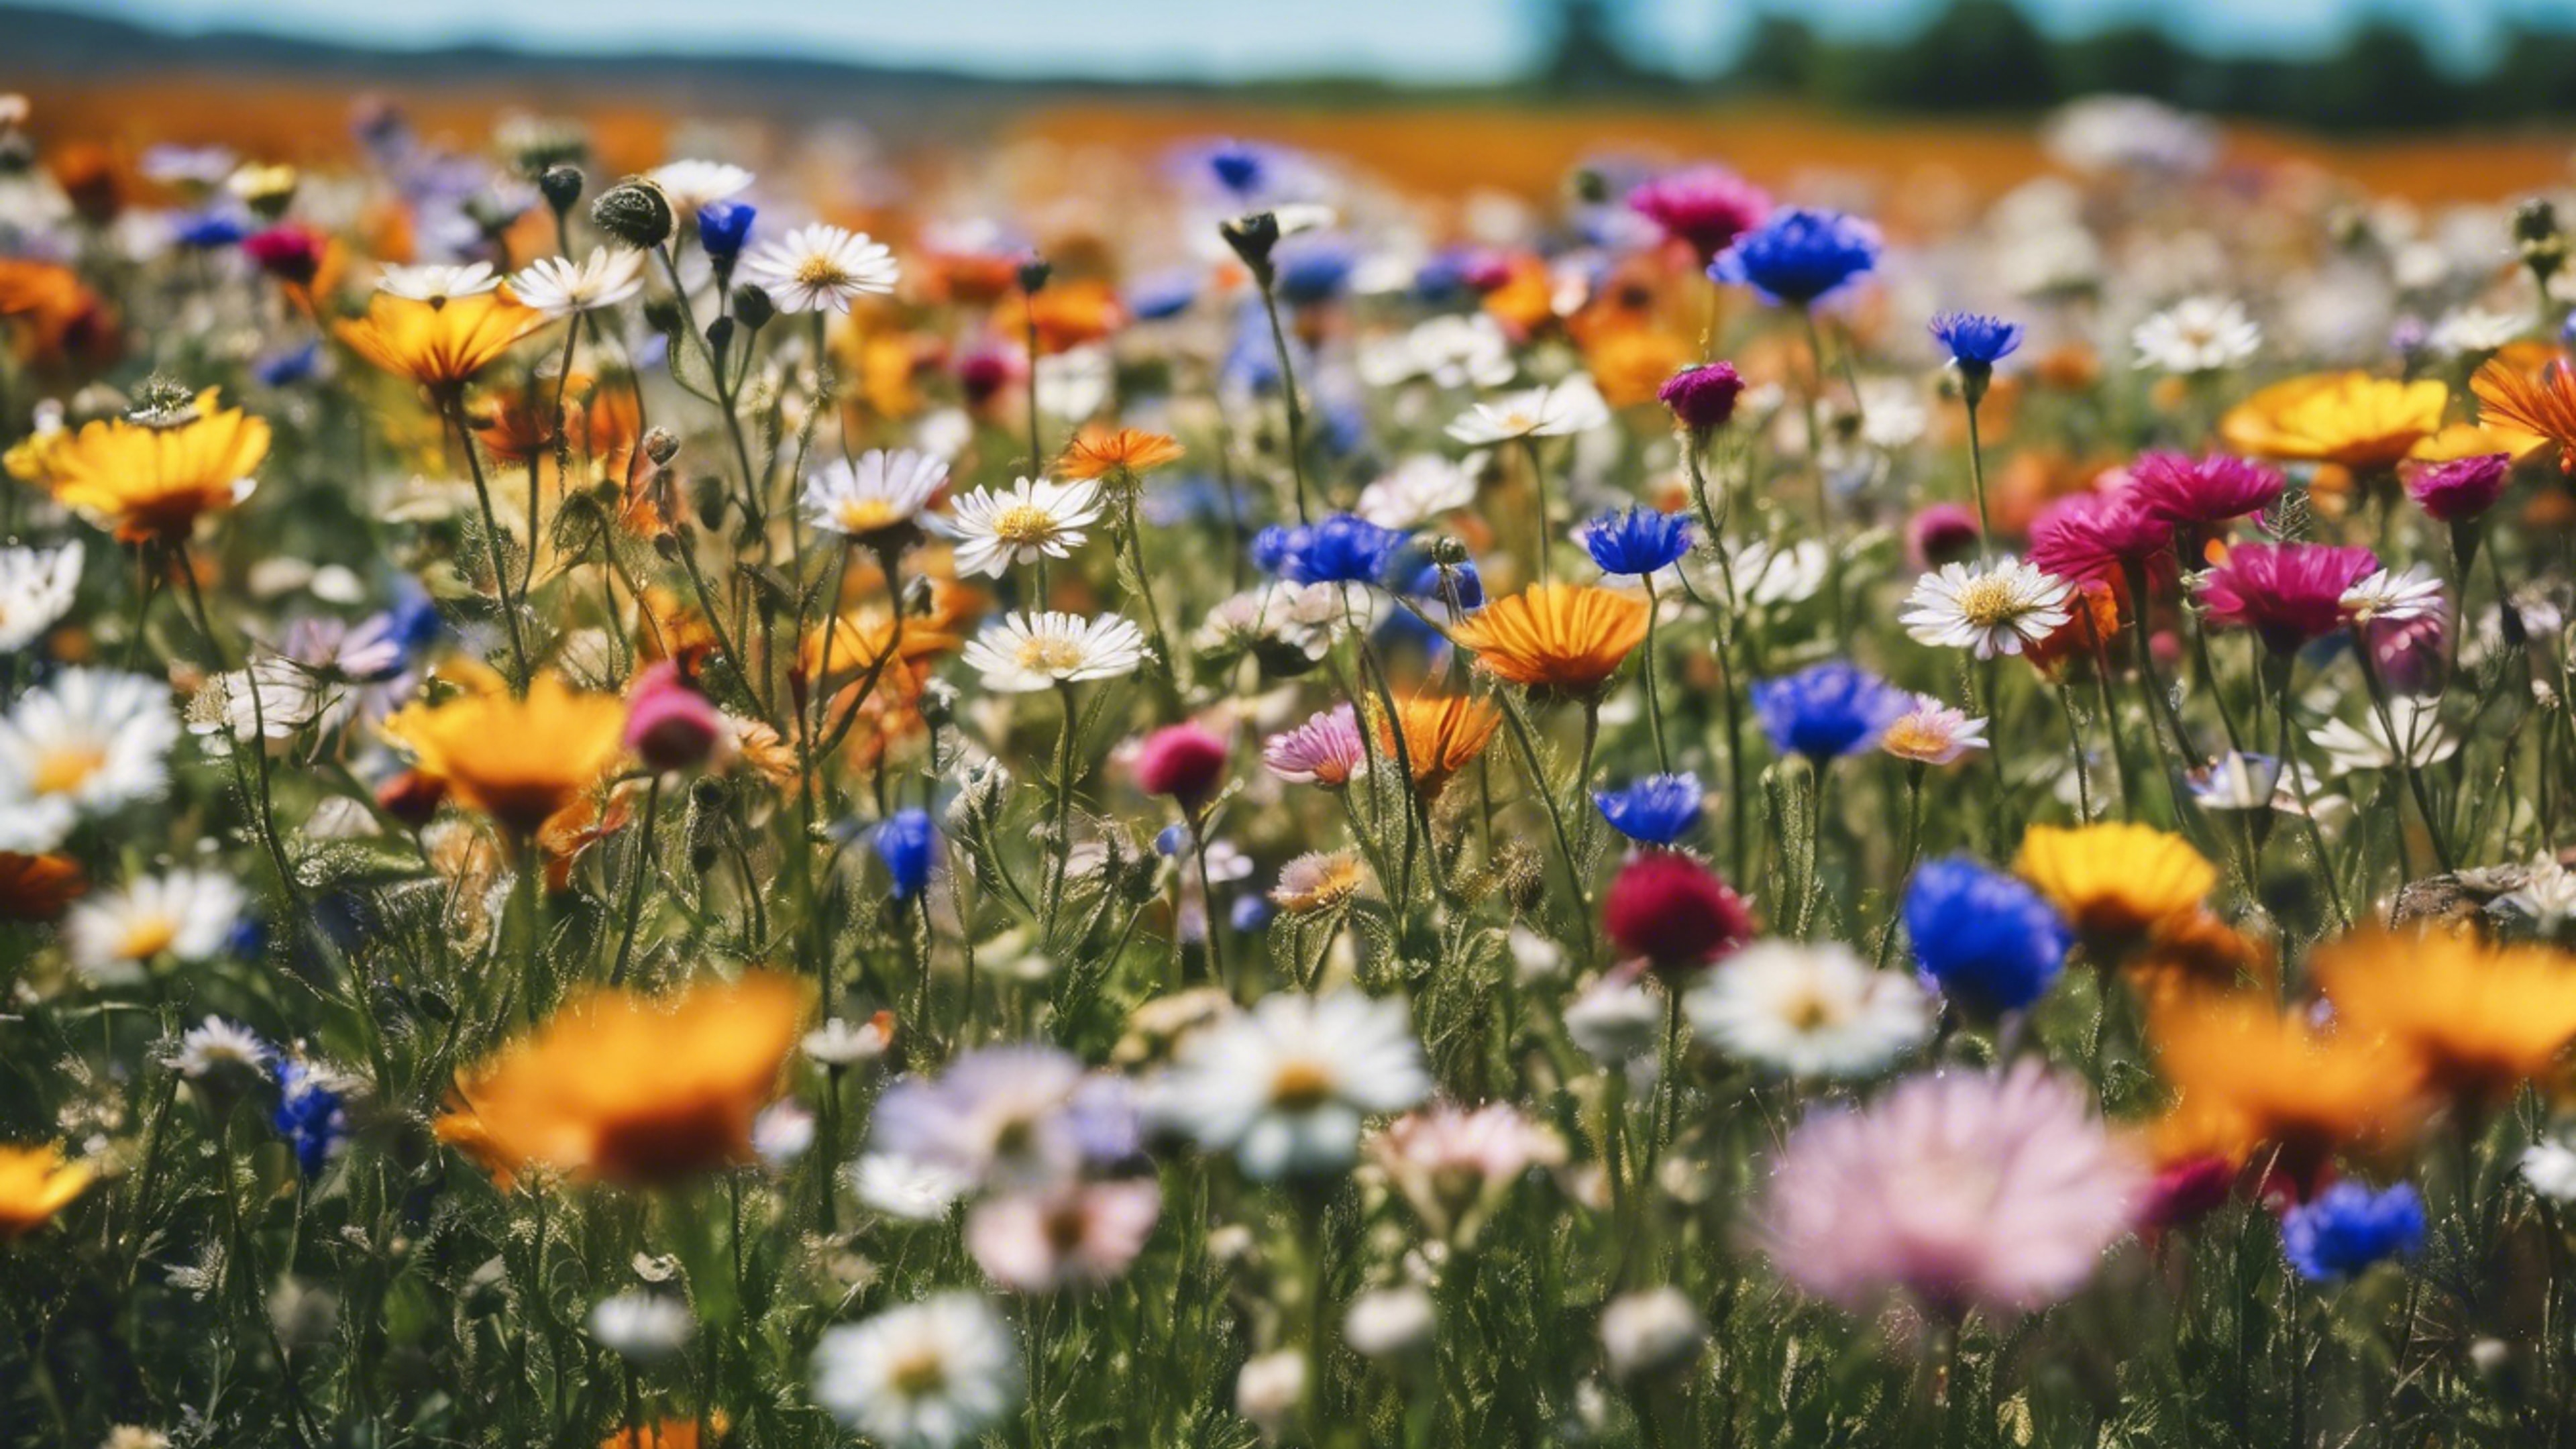 A field of colorful wildflowers under a clear blue sky.壁紙[51b27b0ad62a44999071]